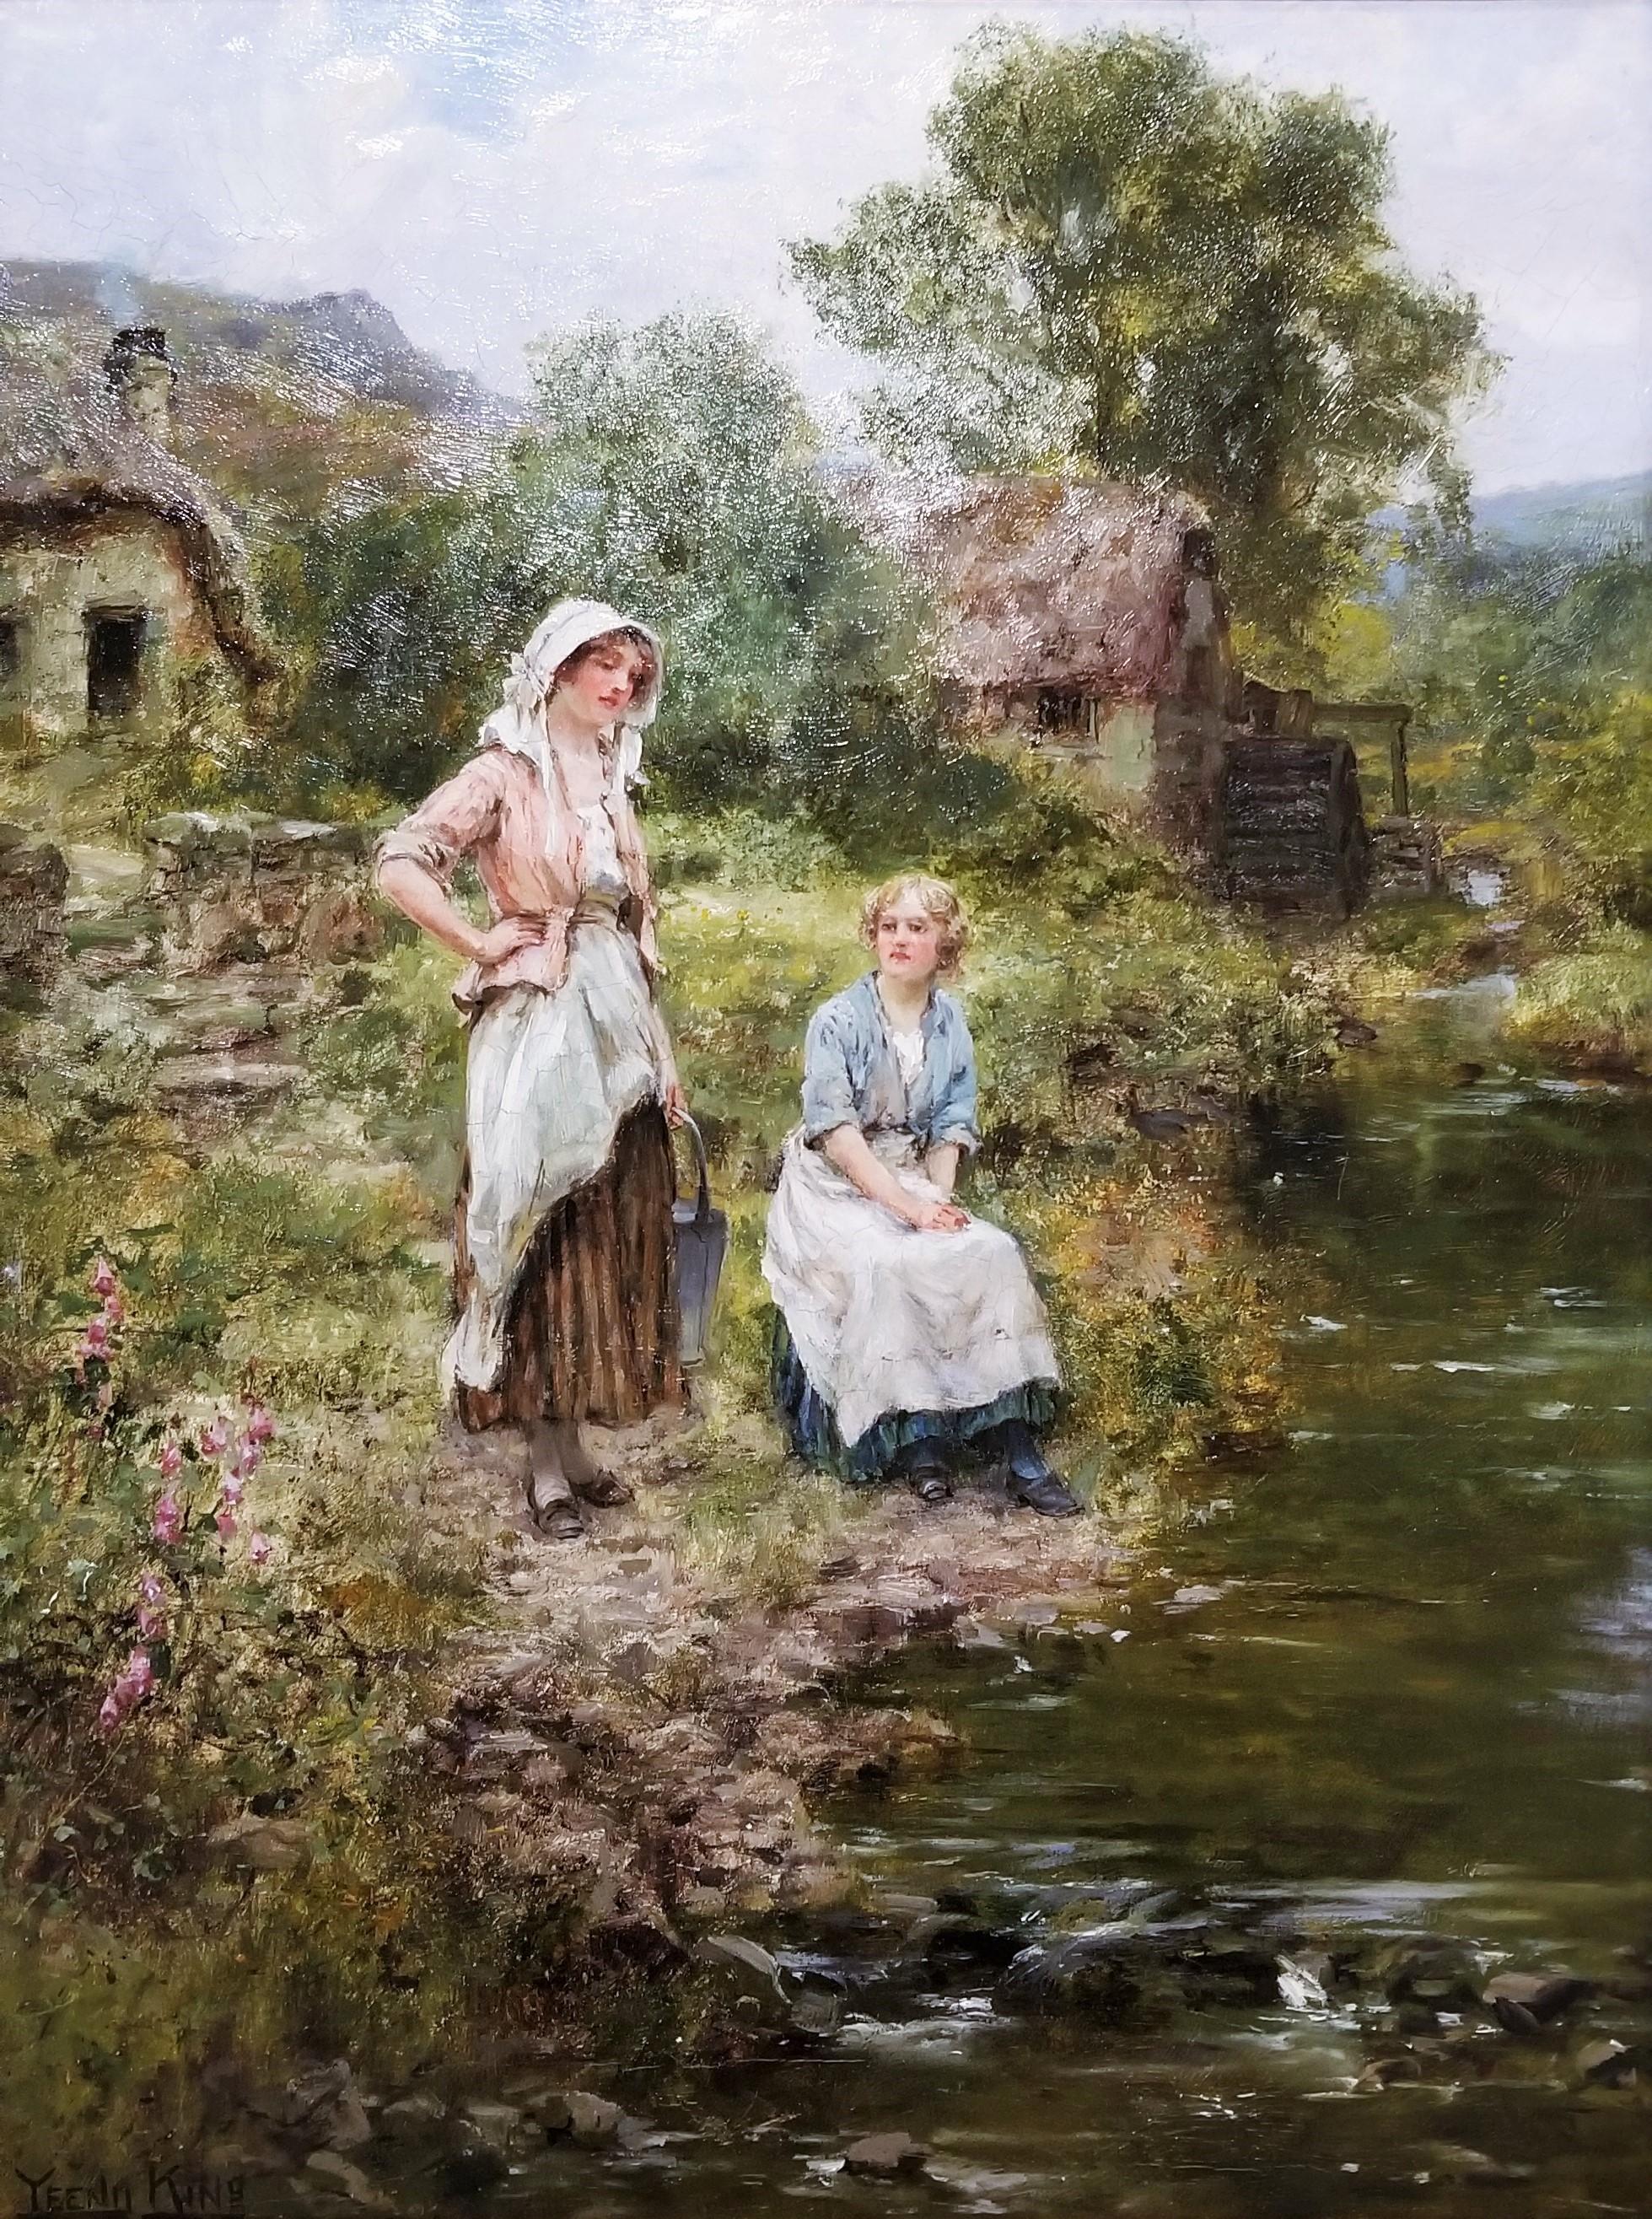 Henry John Yeend King Figurative Painting - Fetching Water by the River /// British Impressionism Yeend King Oil Painting 